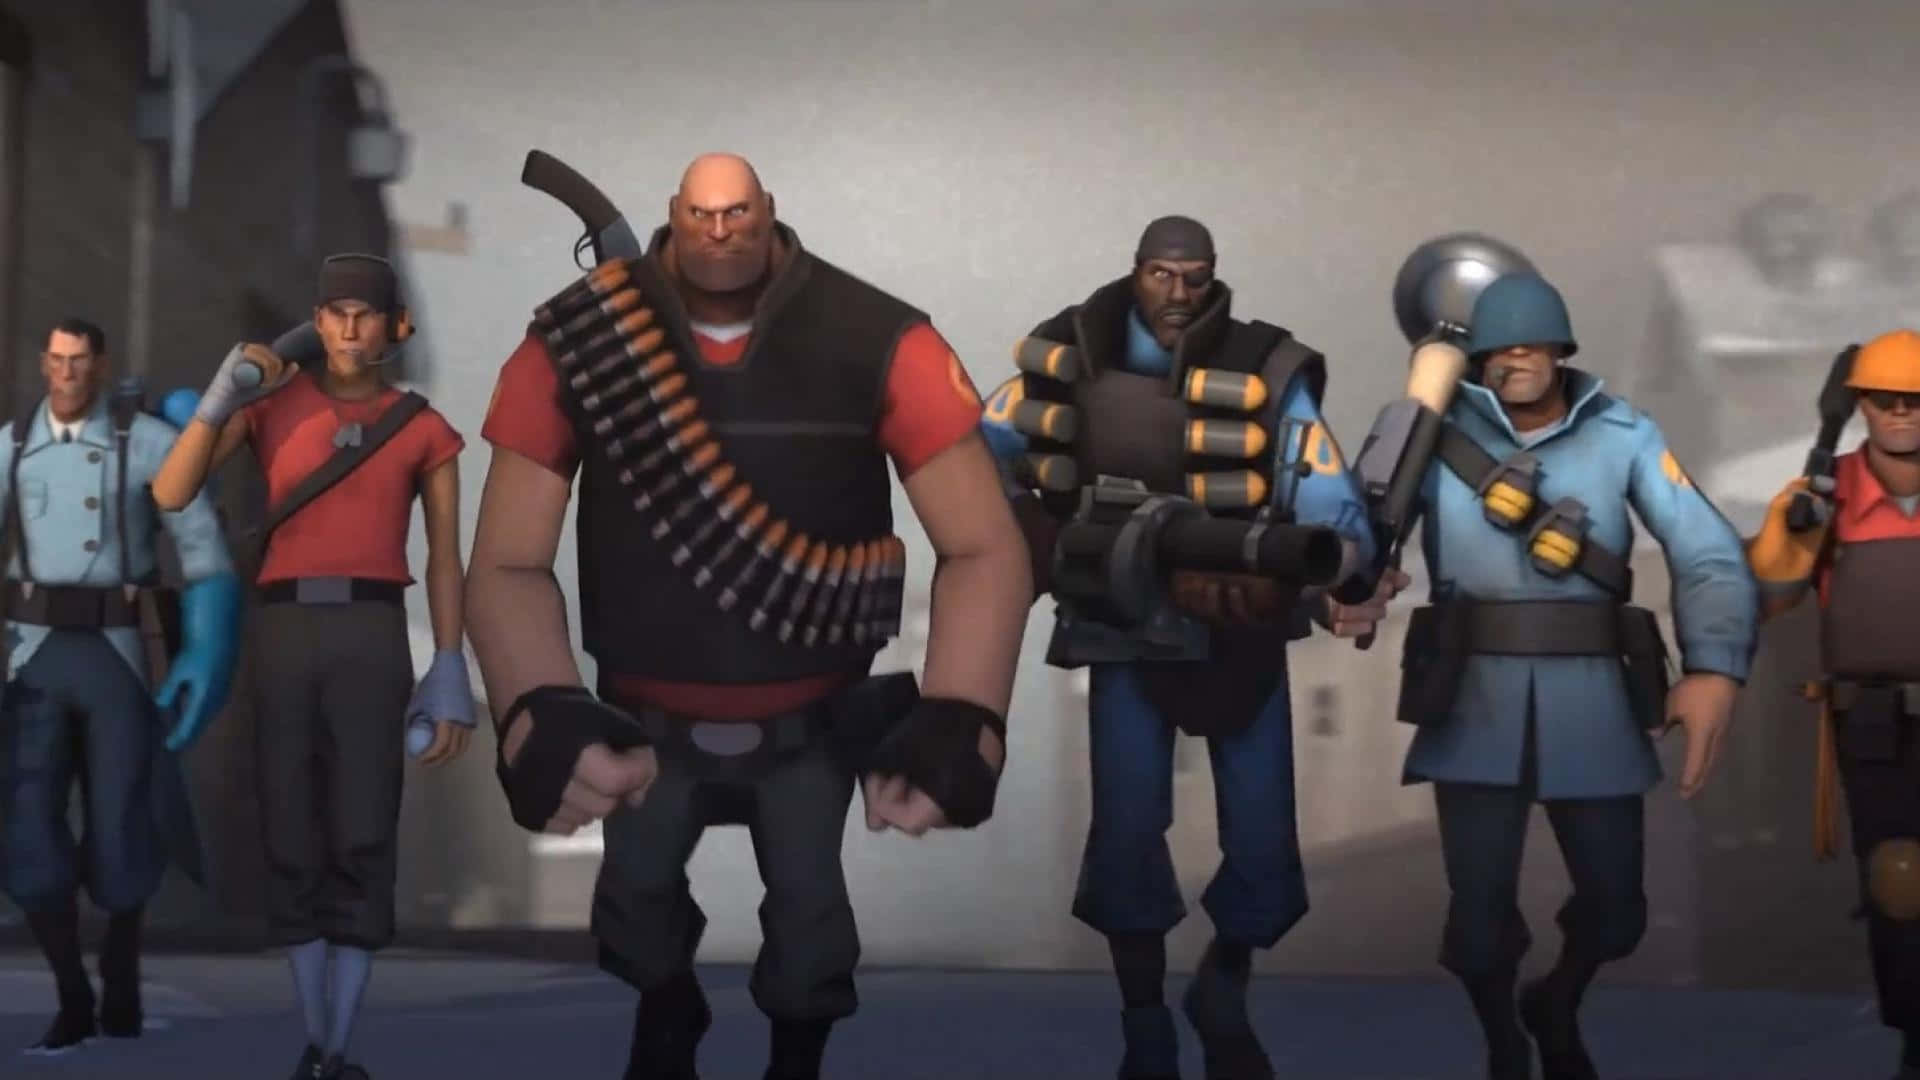 Exciting Team Fortress 2 Characters in Action Wallpaper